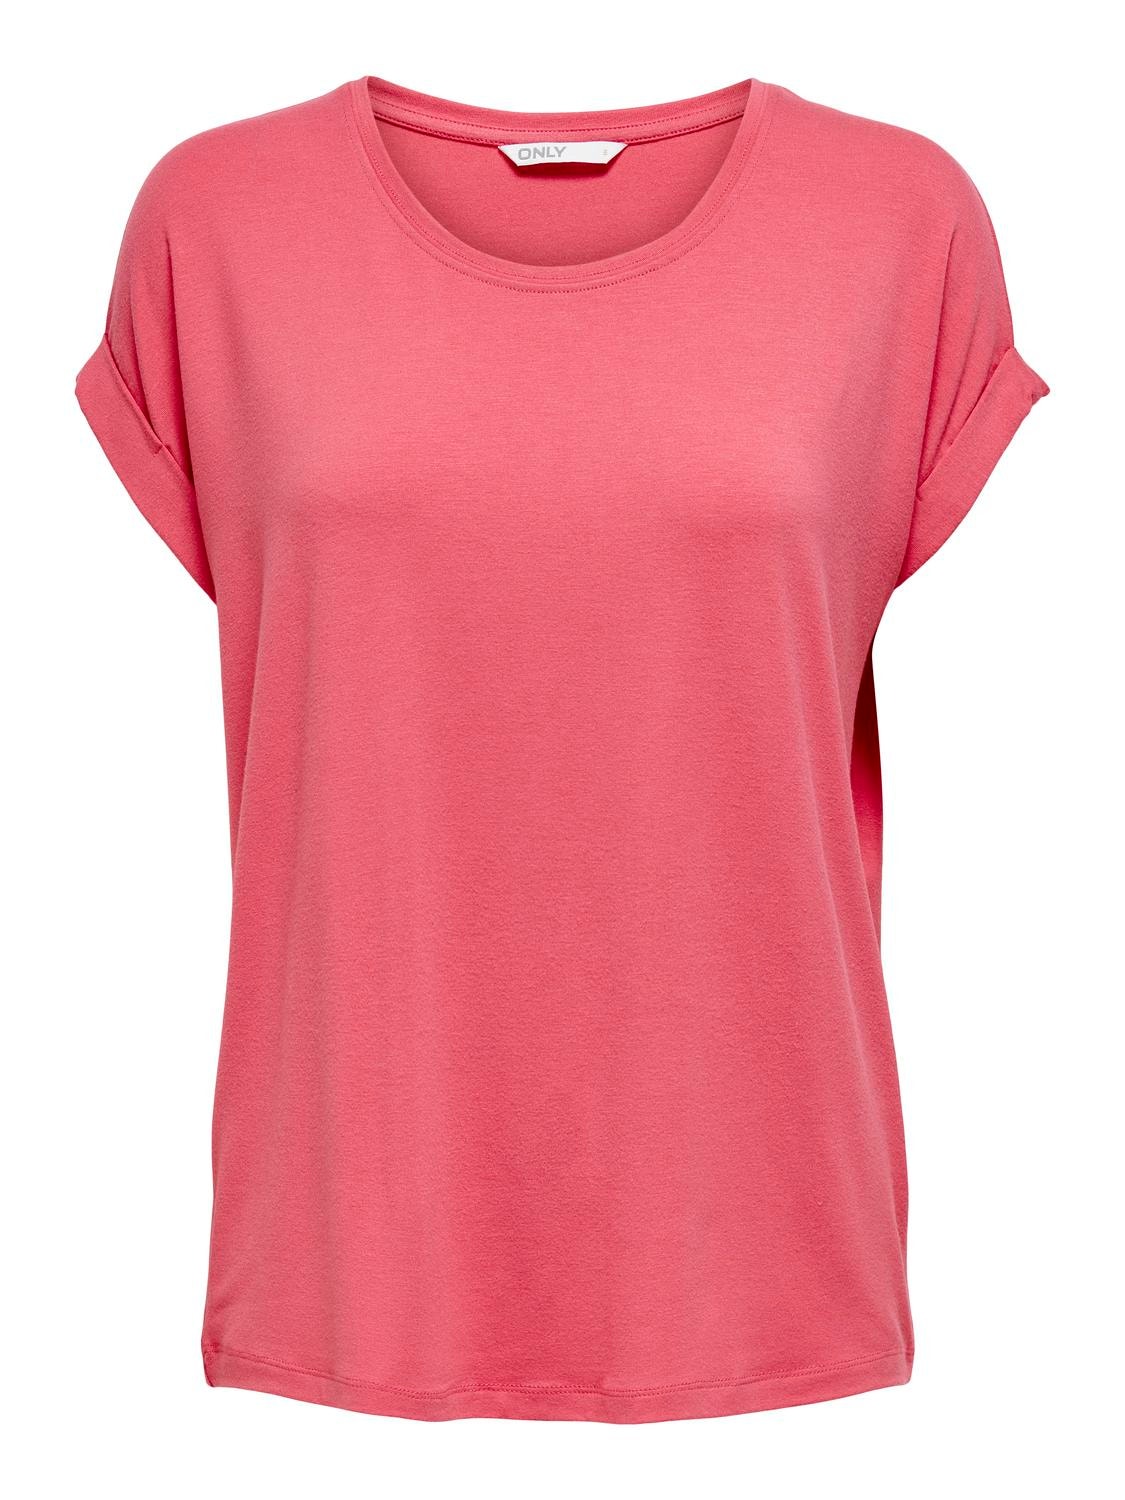 ONLY Loose fit T-shirt -Tea Rose - 15106662